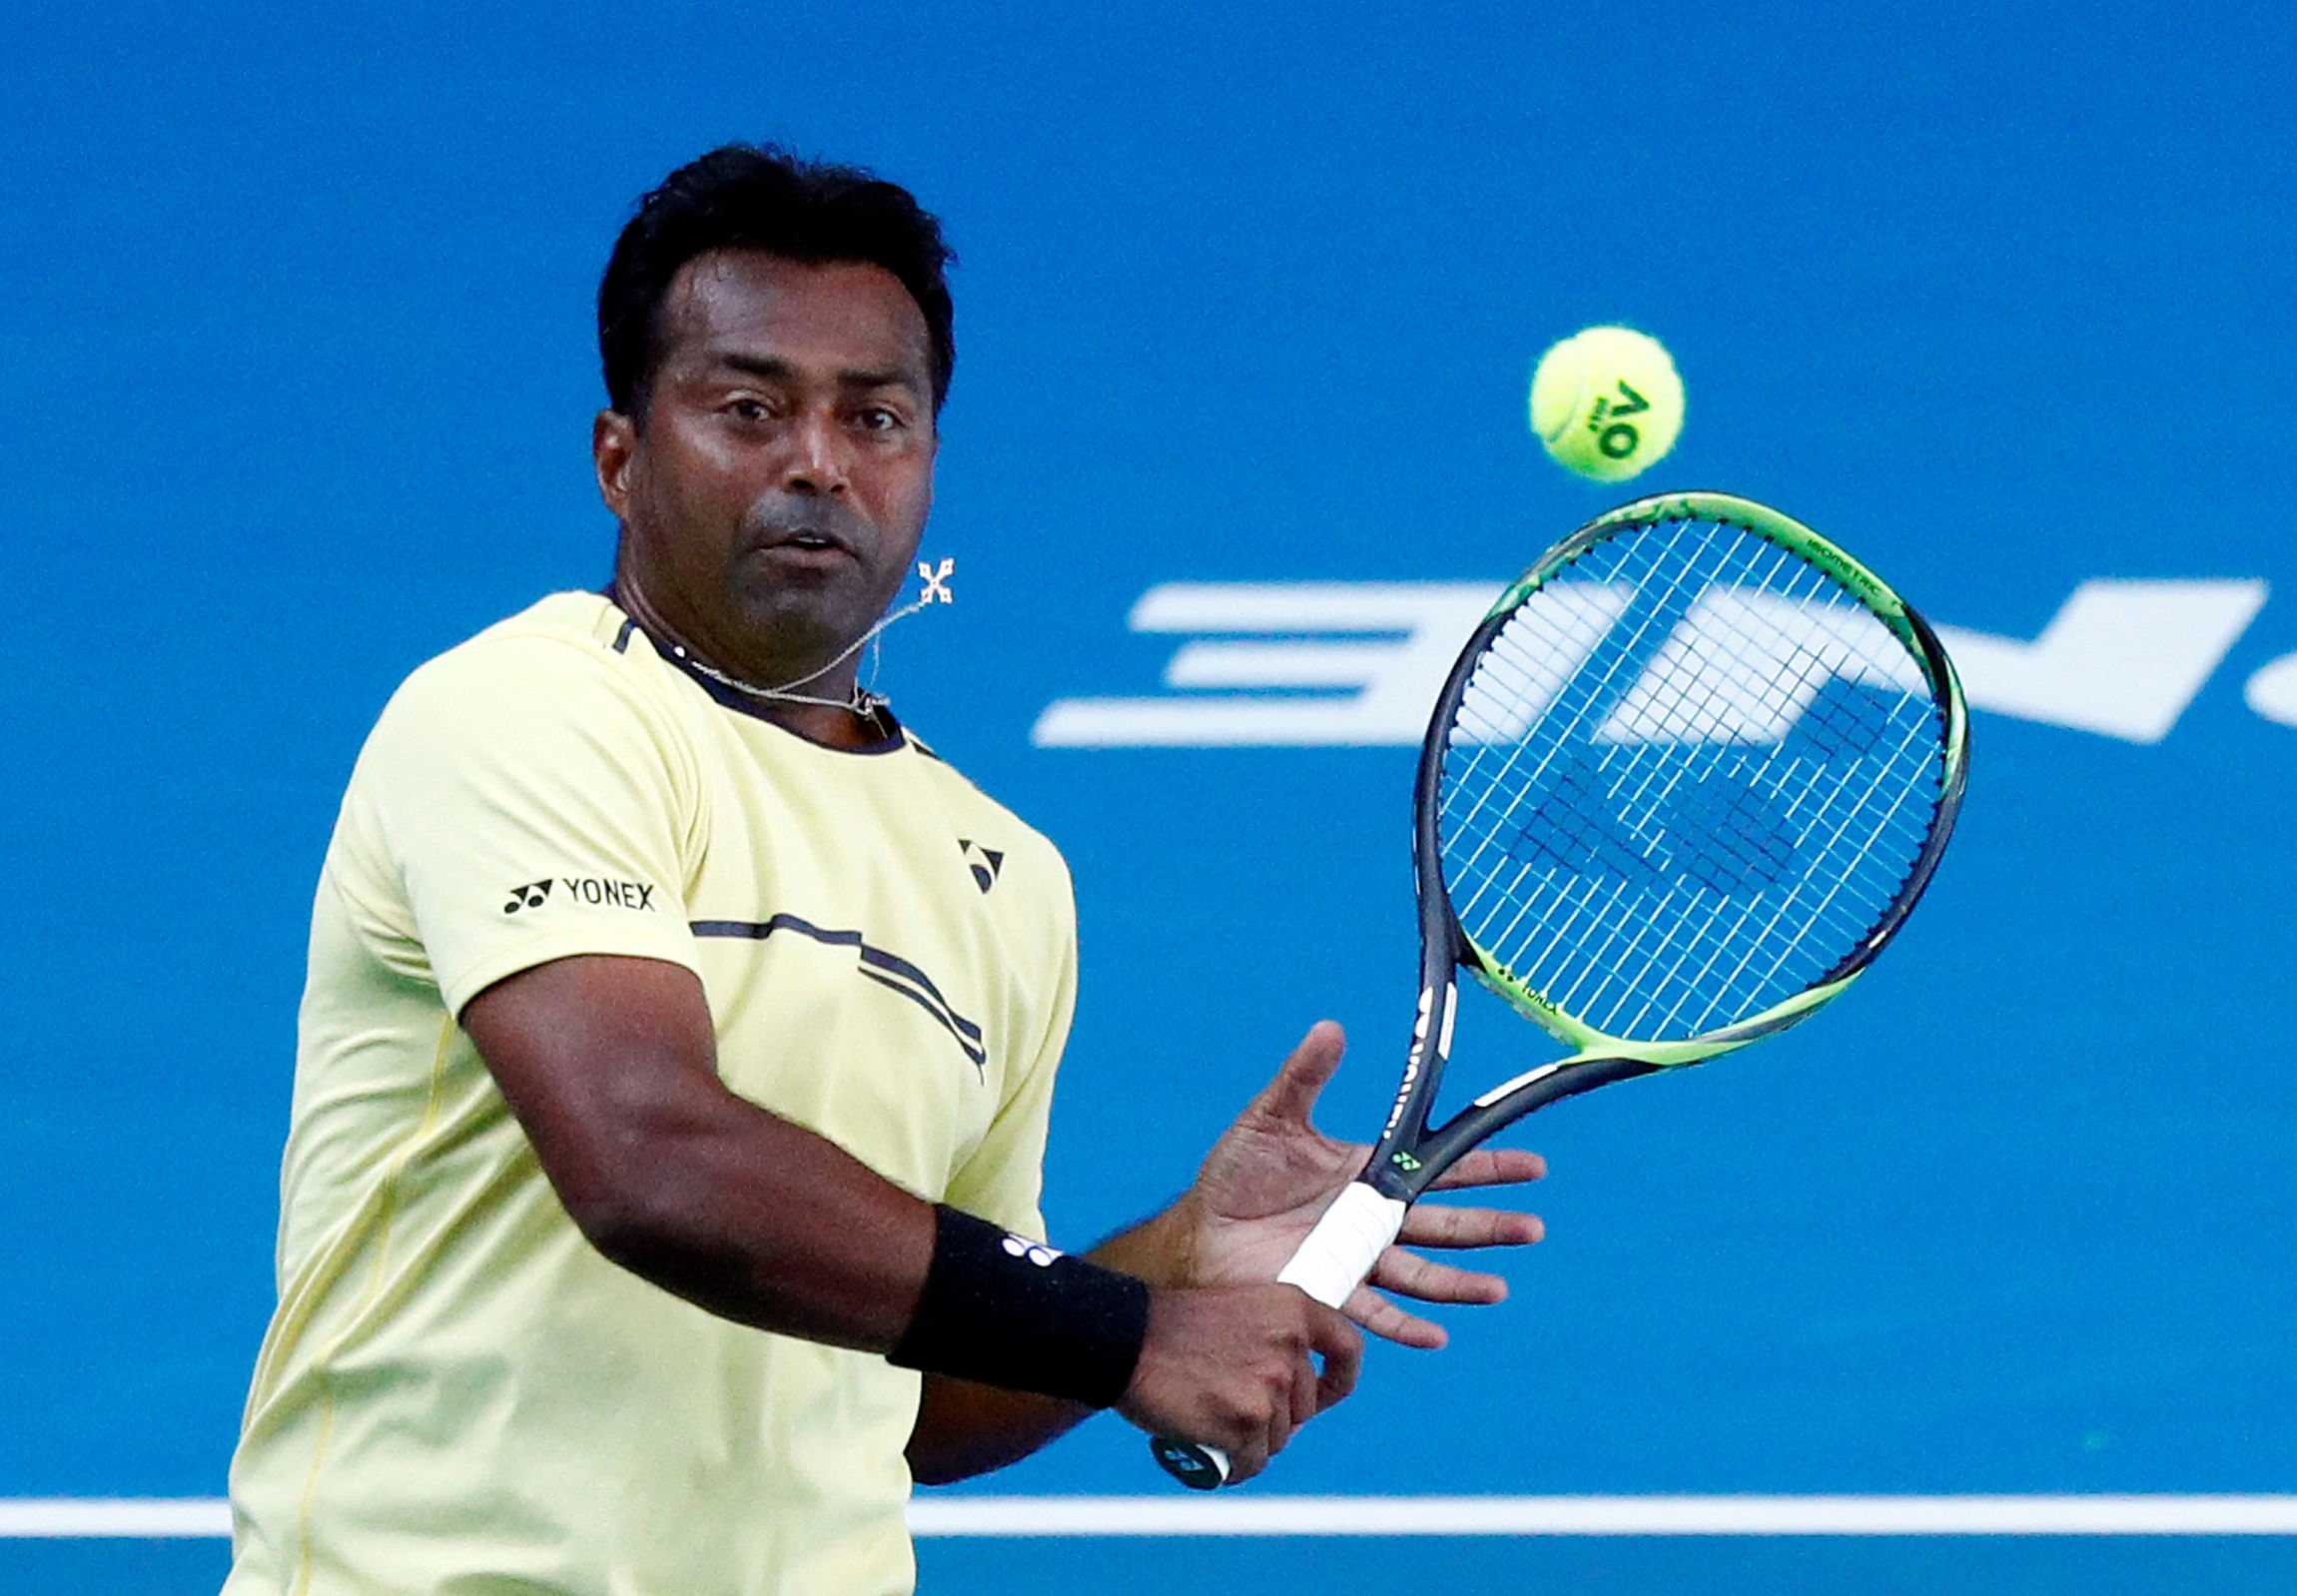 India's Leander Paes in action during the match against Germany's Anna-Lena Groenefeld and Colombia's Robert Farah. (Reuters Photo)